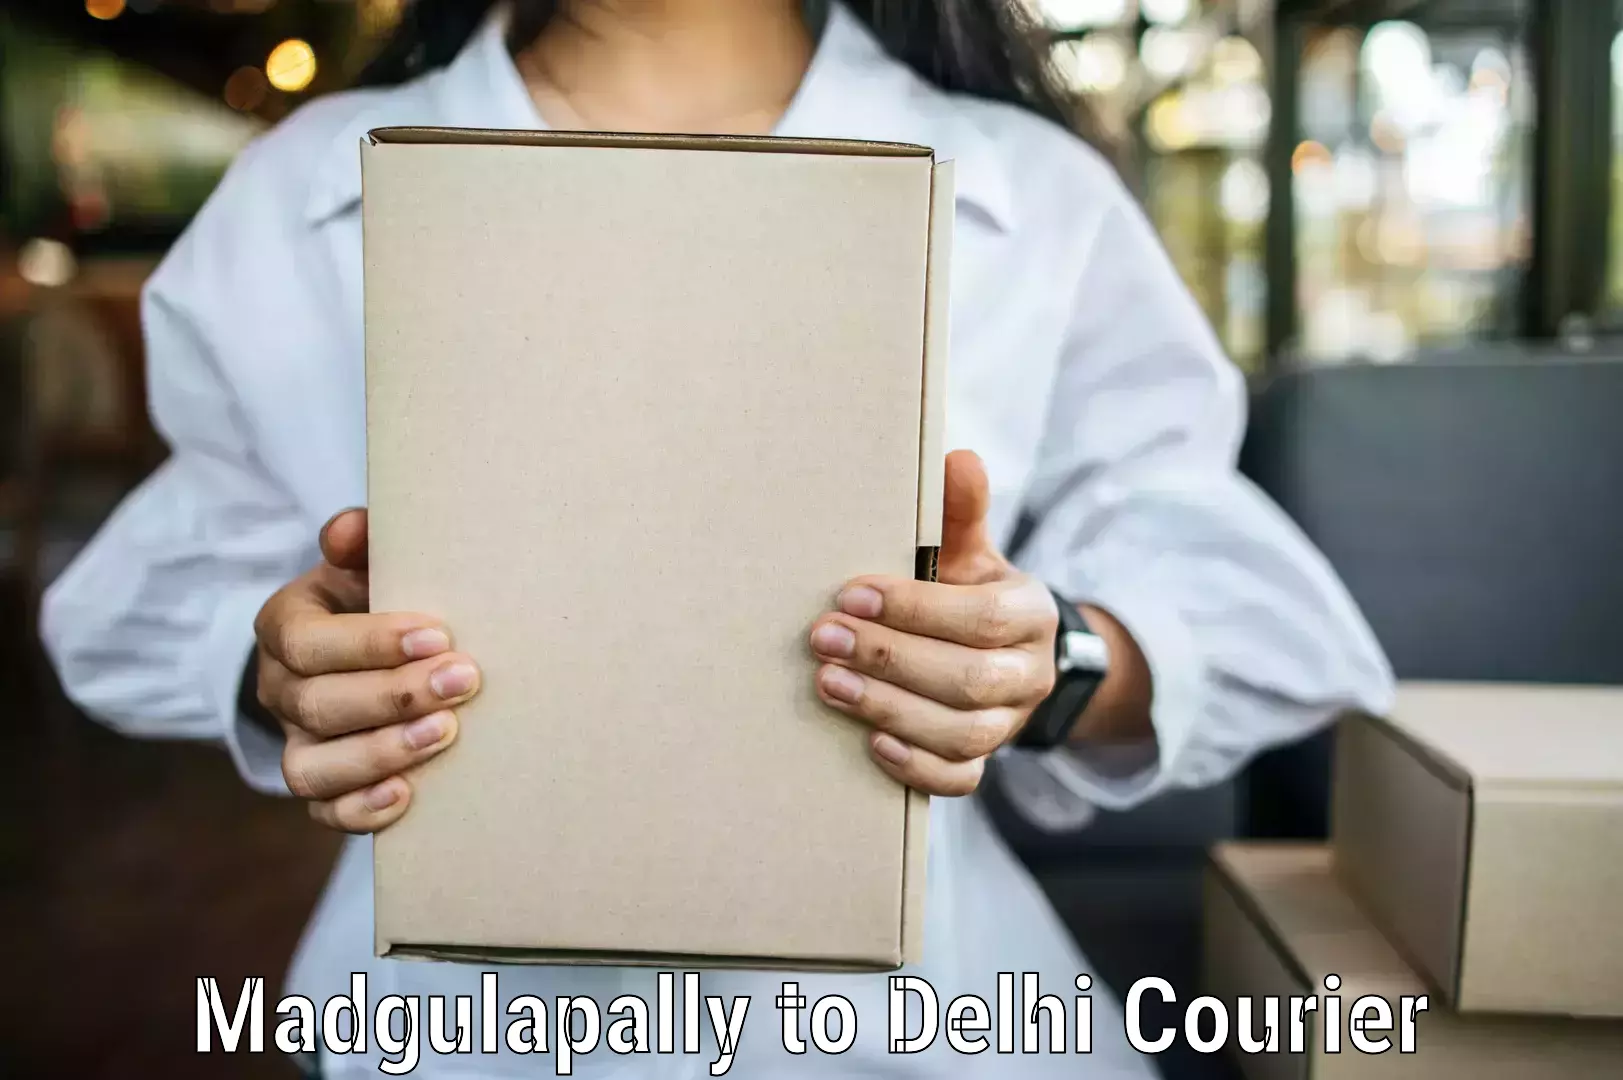 Next-day delivery options Madgulapally to East Delhi